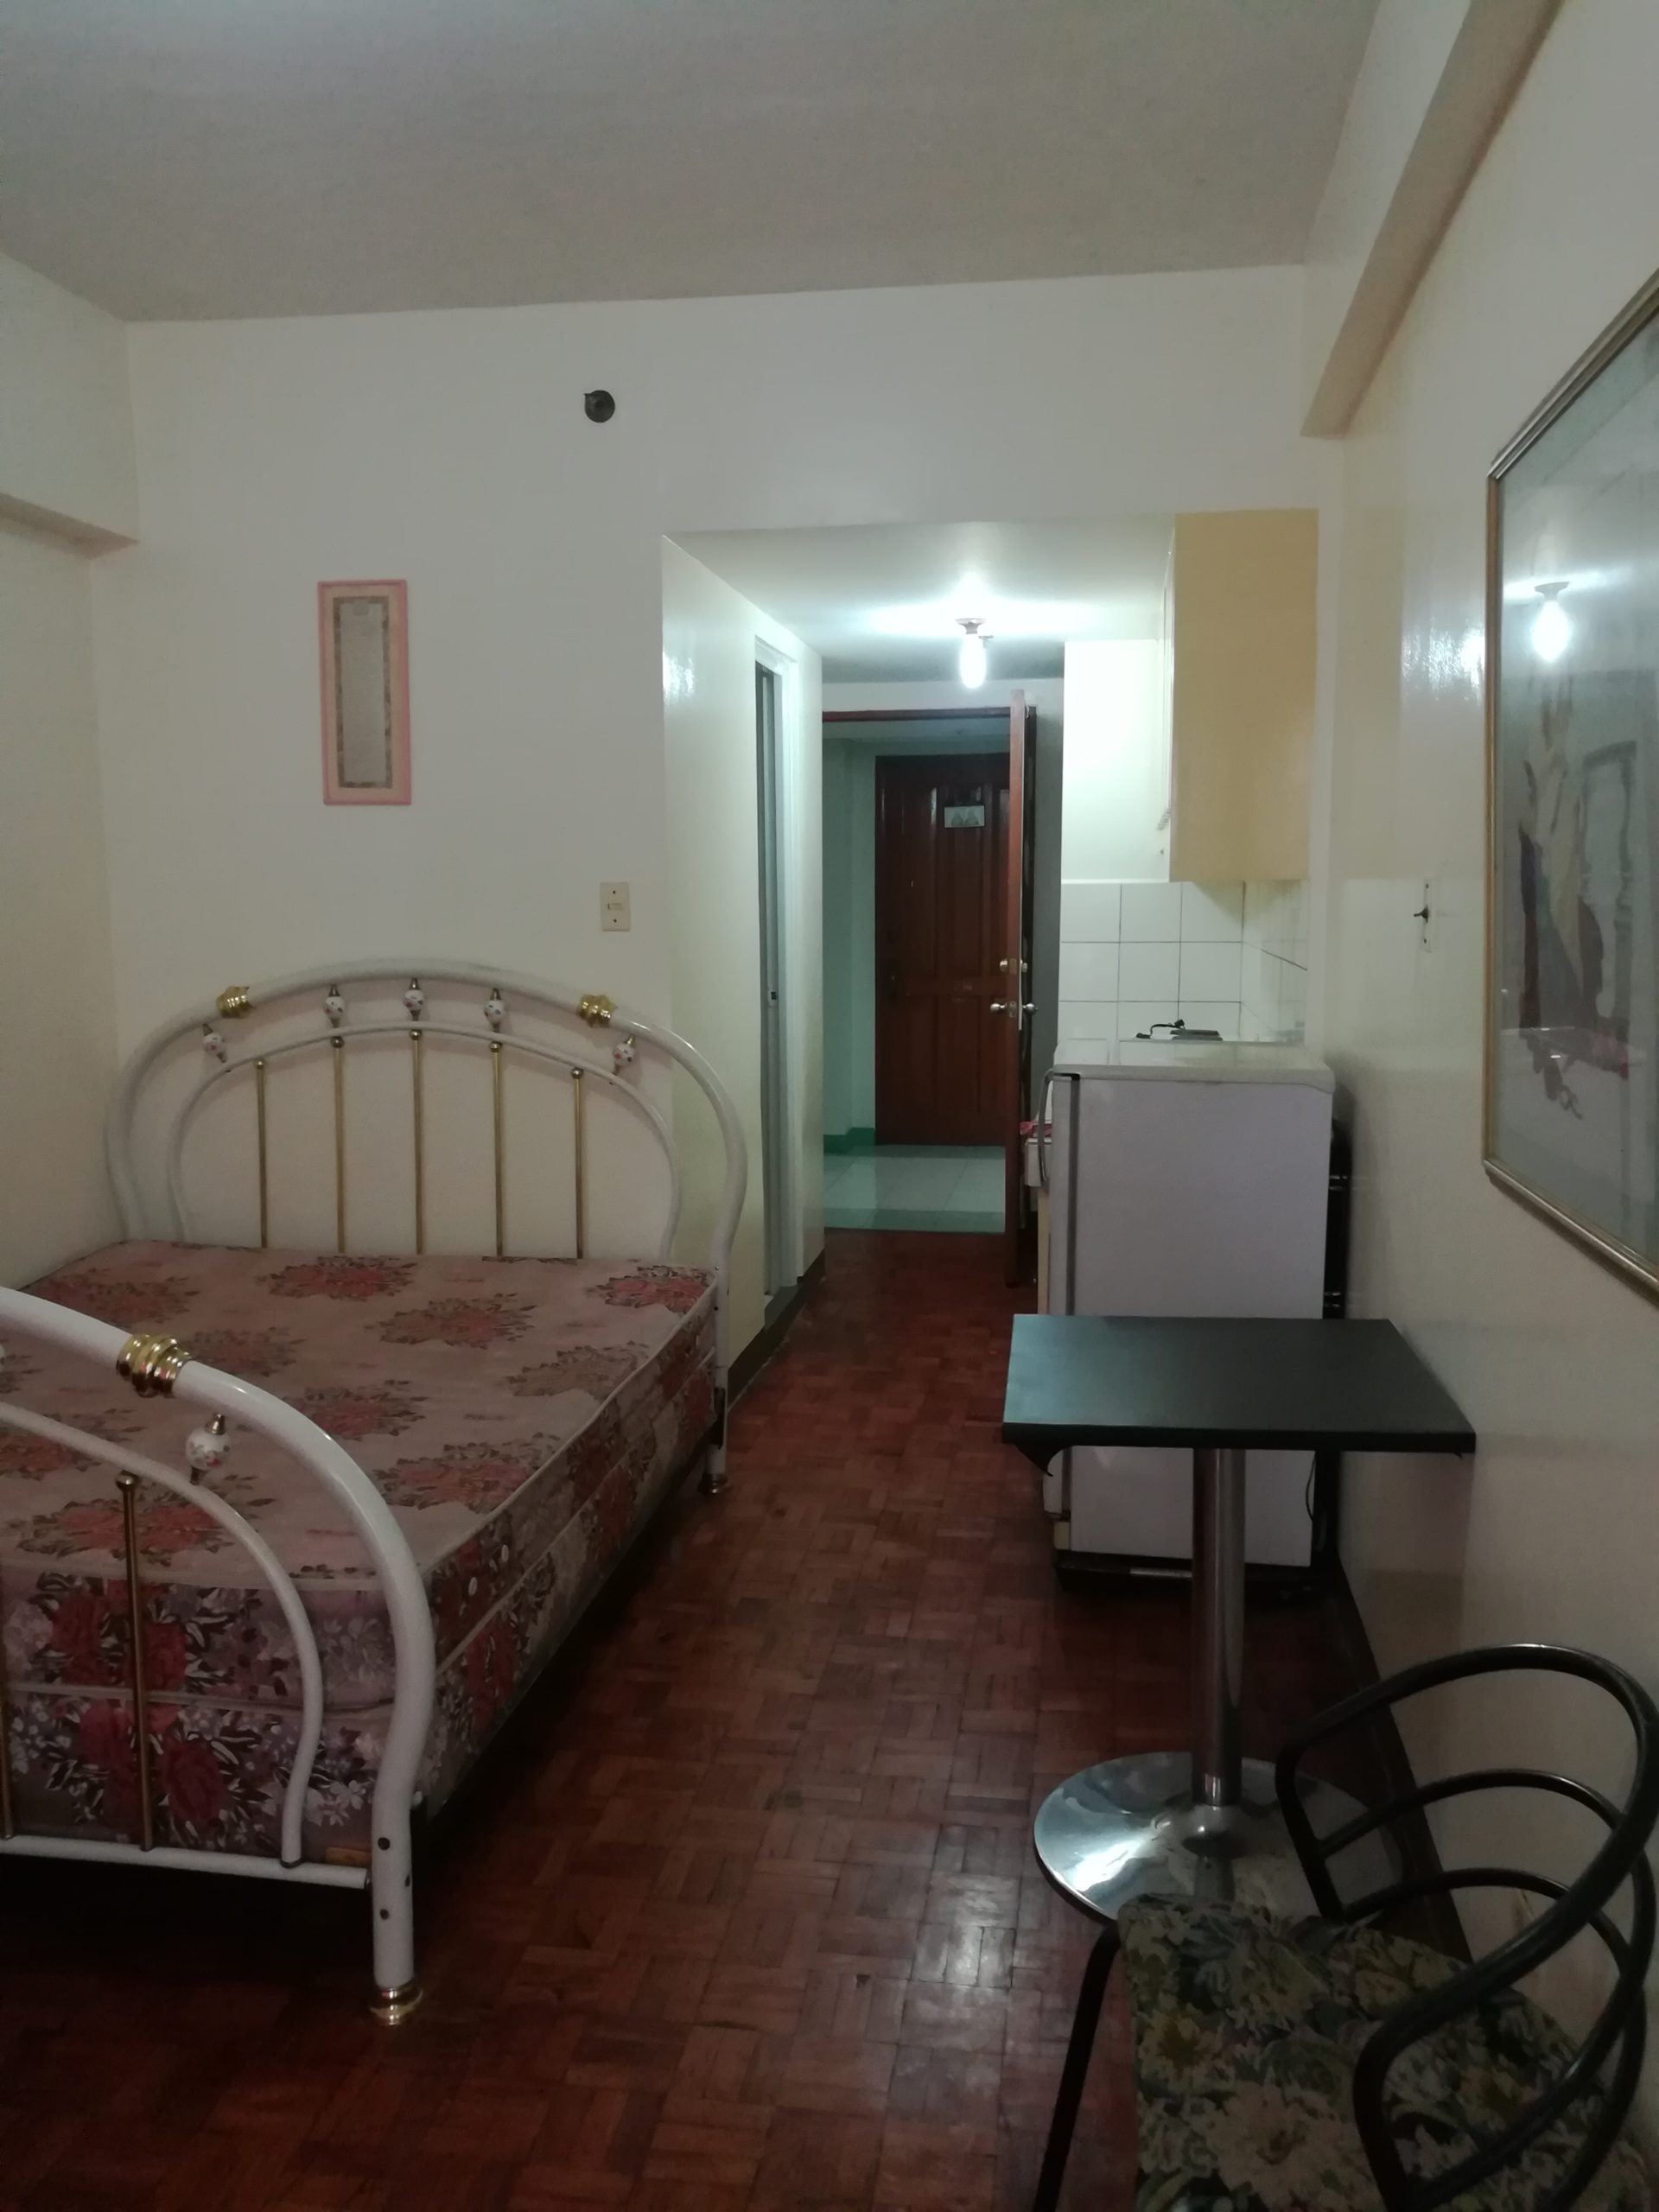 Studio for Rent or Lease Mandaluyong City